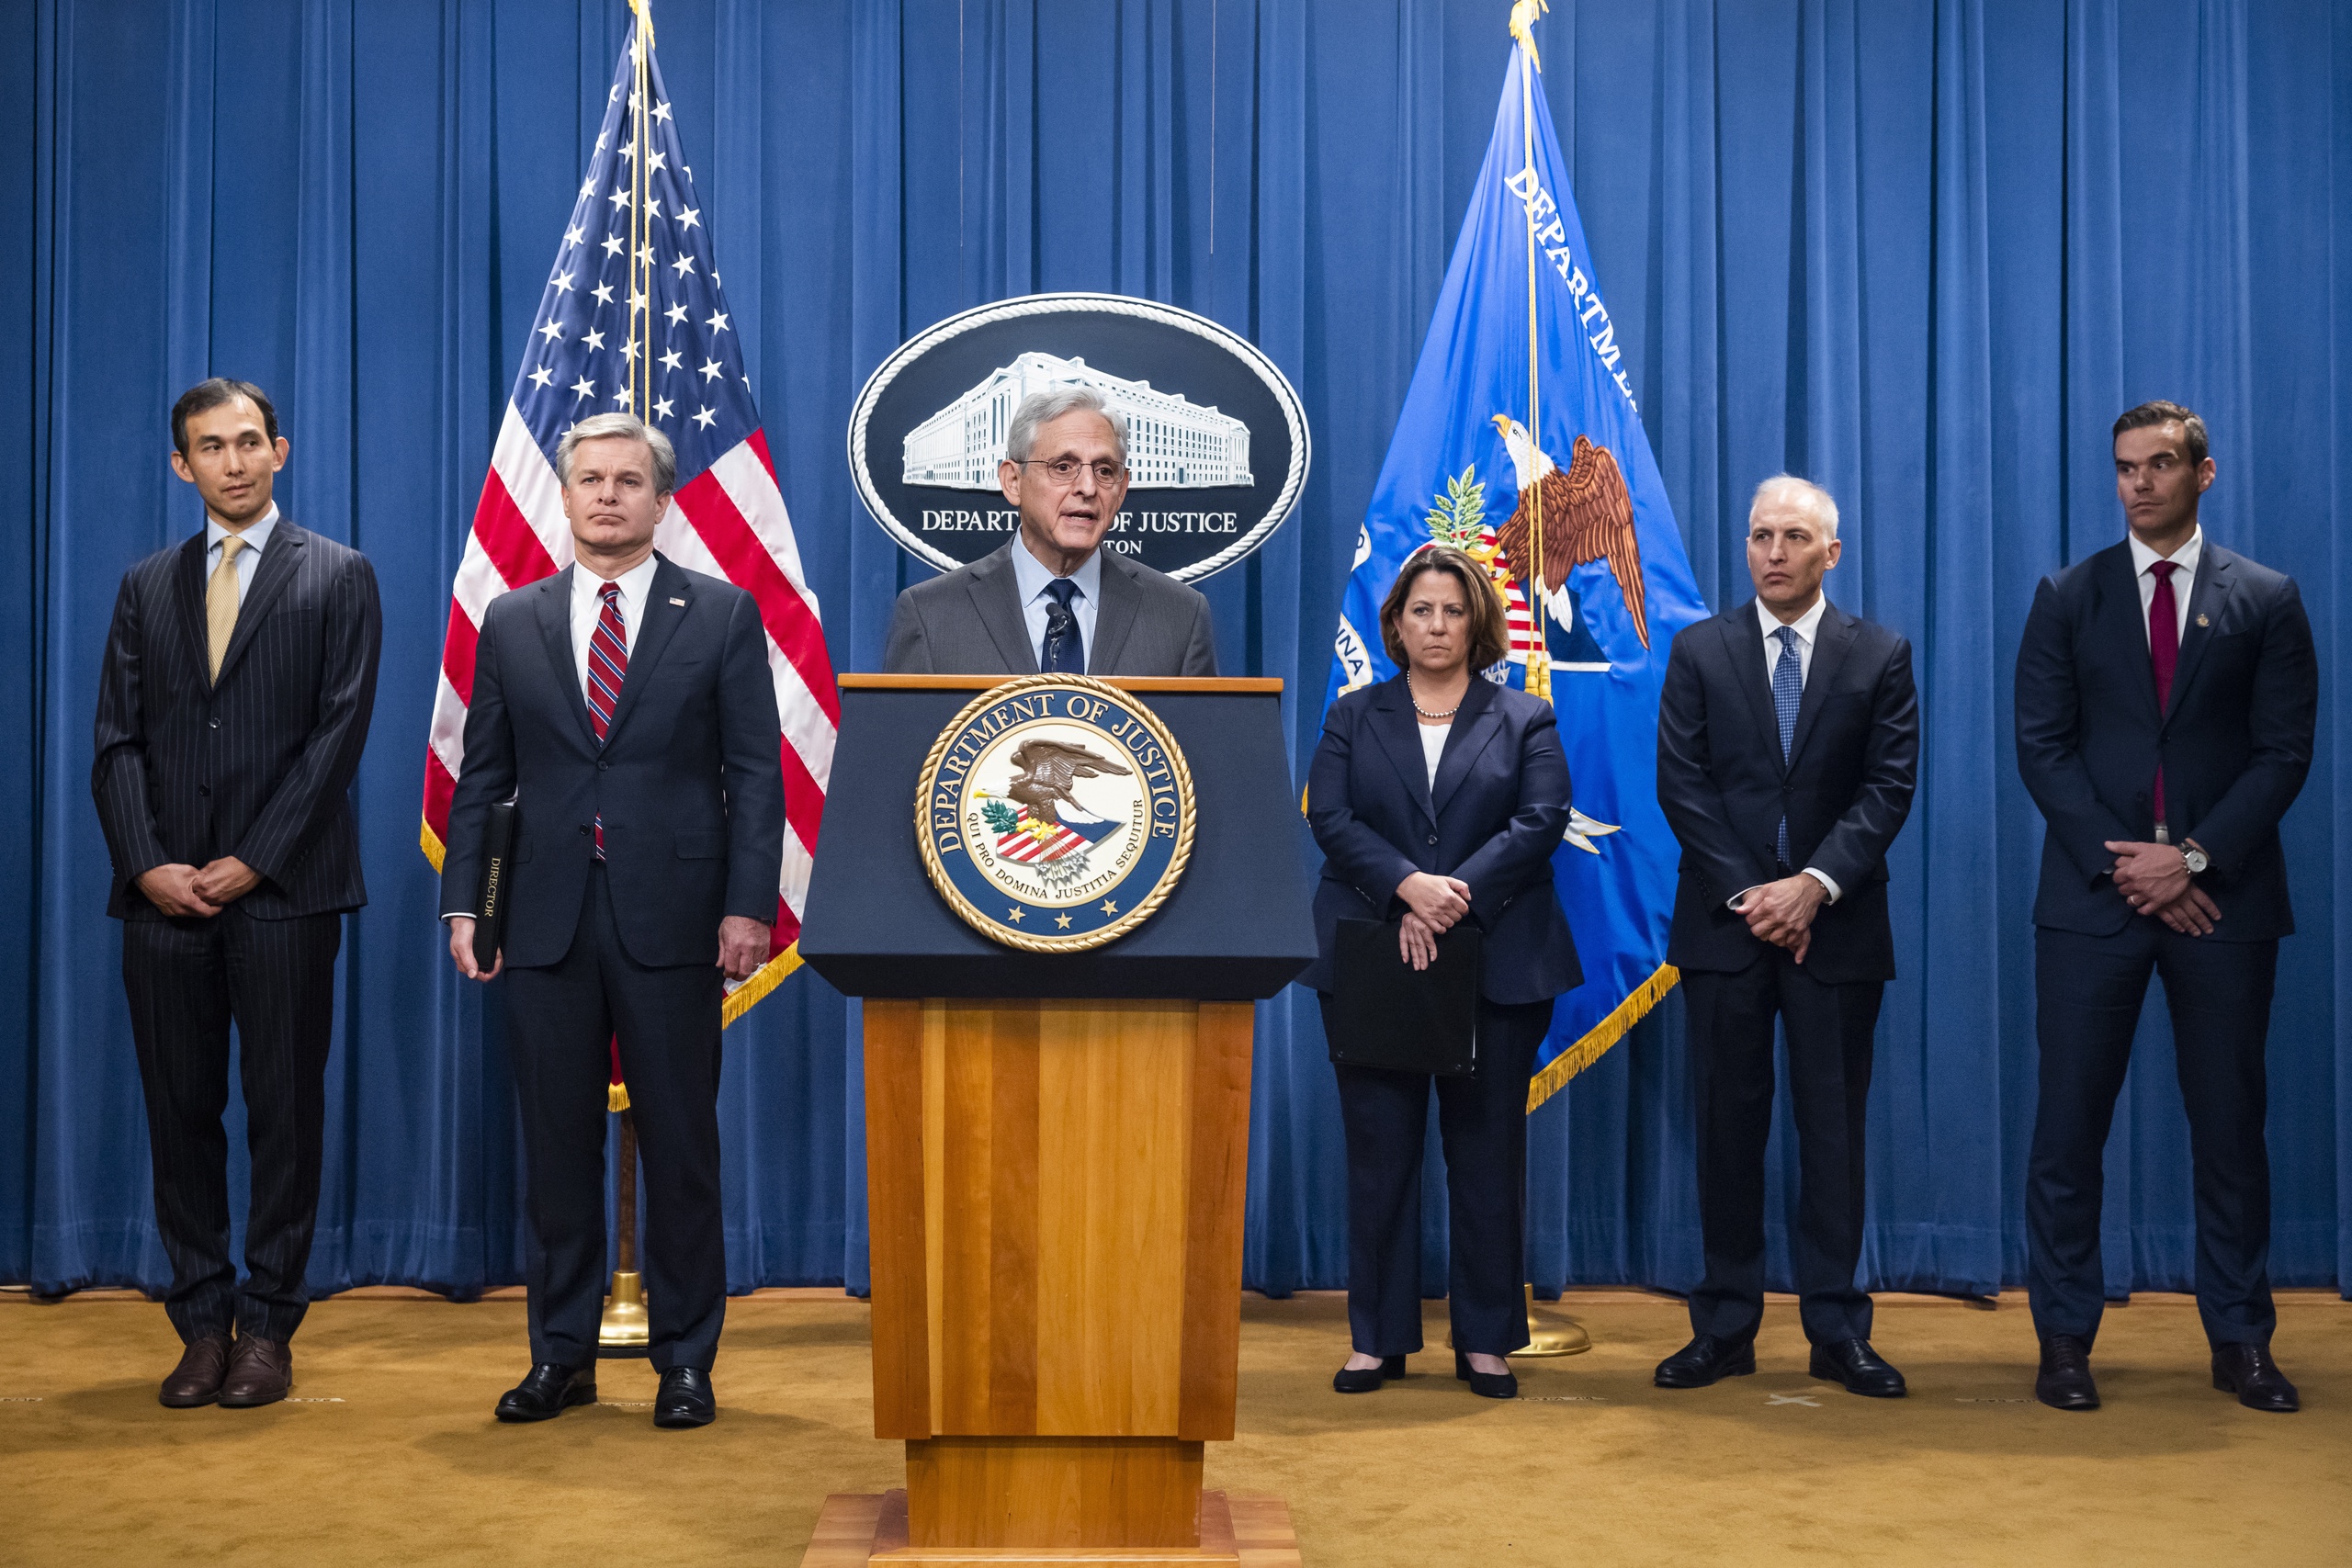 epa10263548 US Attorney General Merrick B. Garland (C), flanked by Deputy Attorney General Lisa O. Monaco (C-R) and FBI Director Christopher Wray (C-L), speaks to the media about national security cases addressing 'malign influence schemes' from China at the Department of Justice in Washington, DC, USA, 24 October 2022.  EPA/JIM LO SCALZO